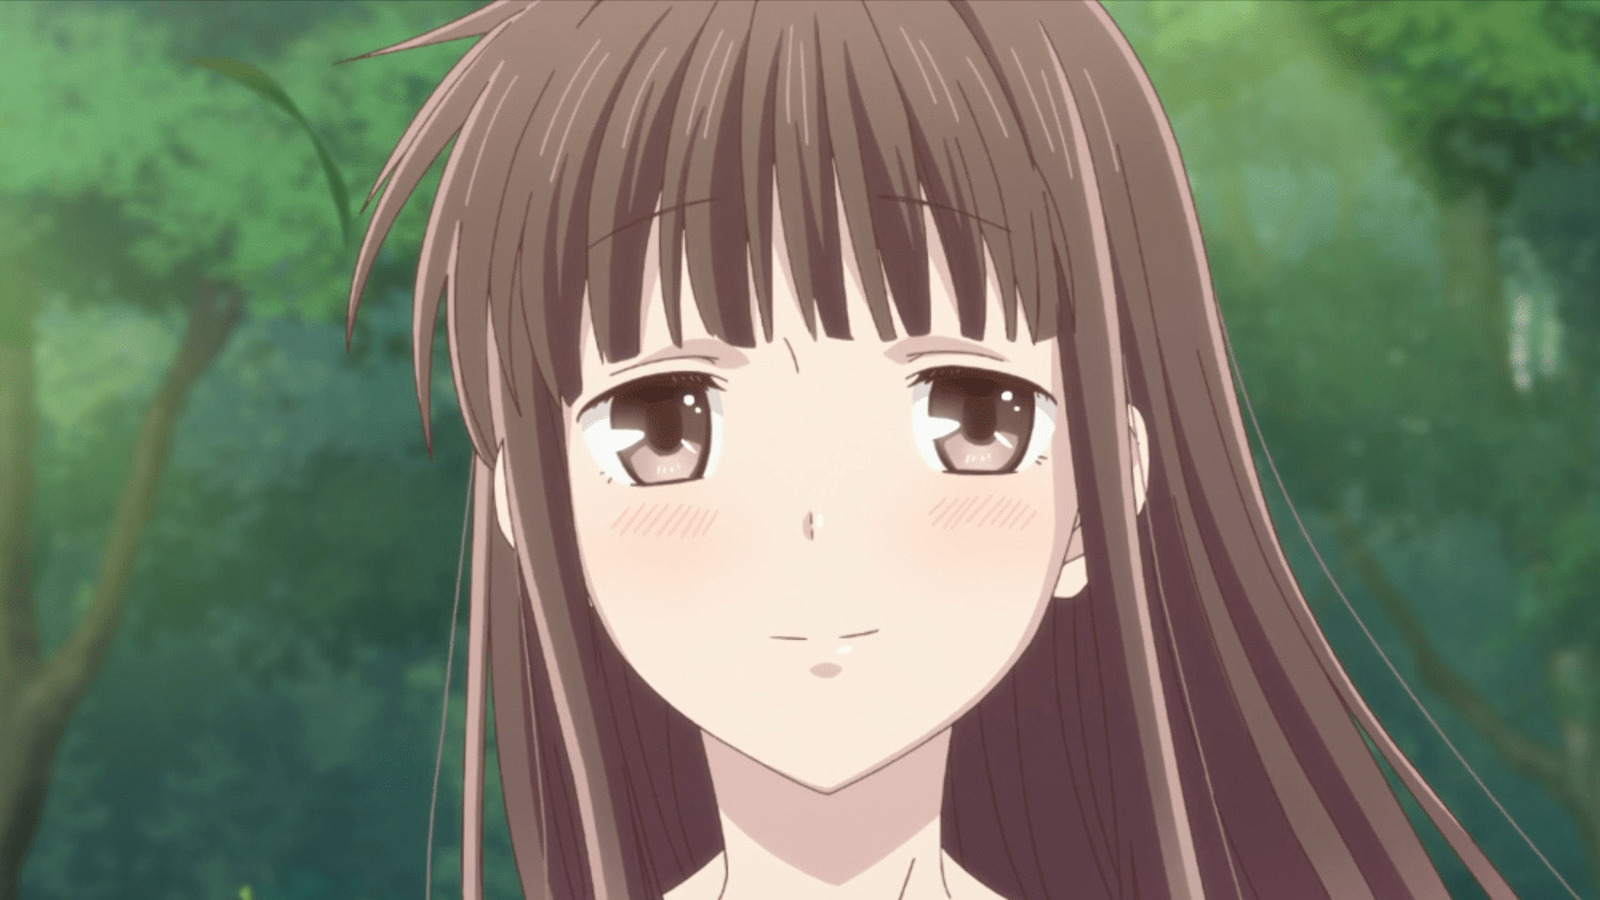 Laura Bailey: Returning to Fruits Basket 'Meant So Much